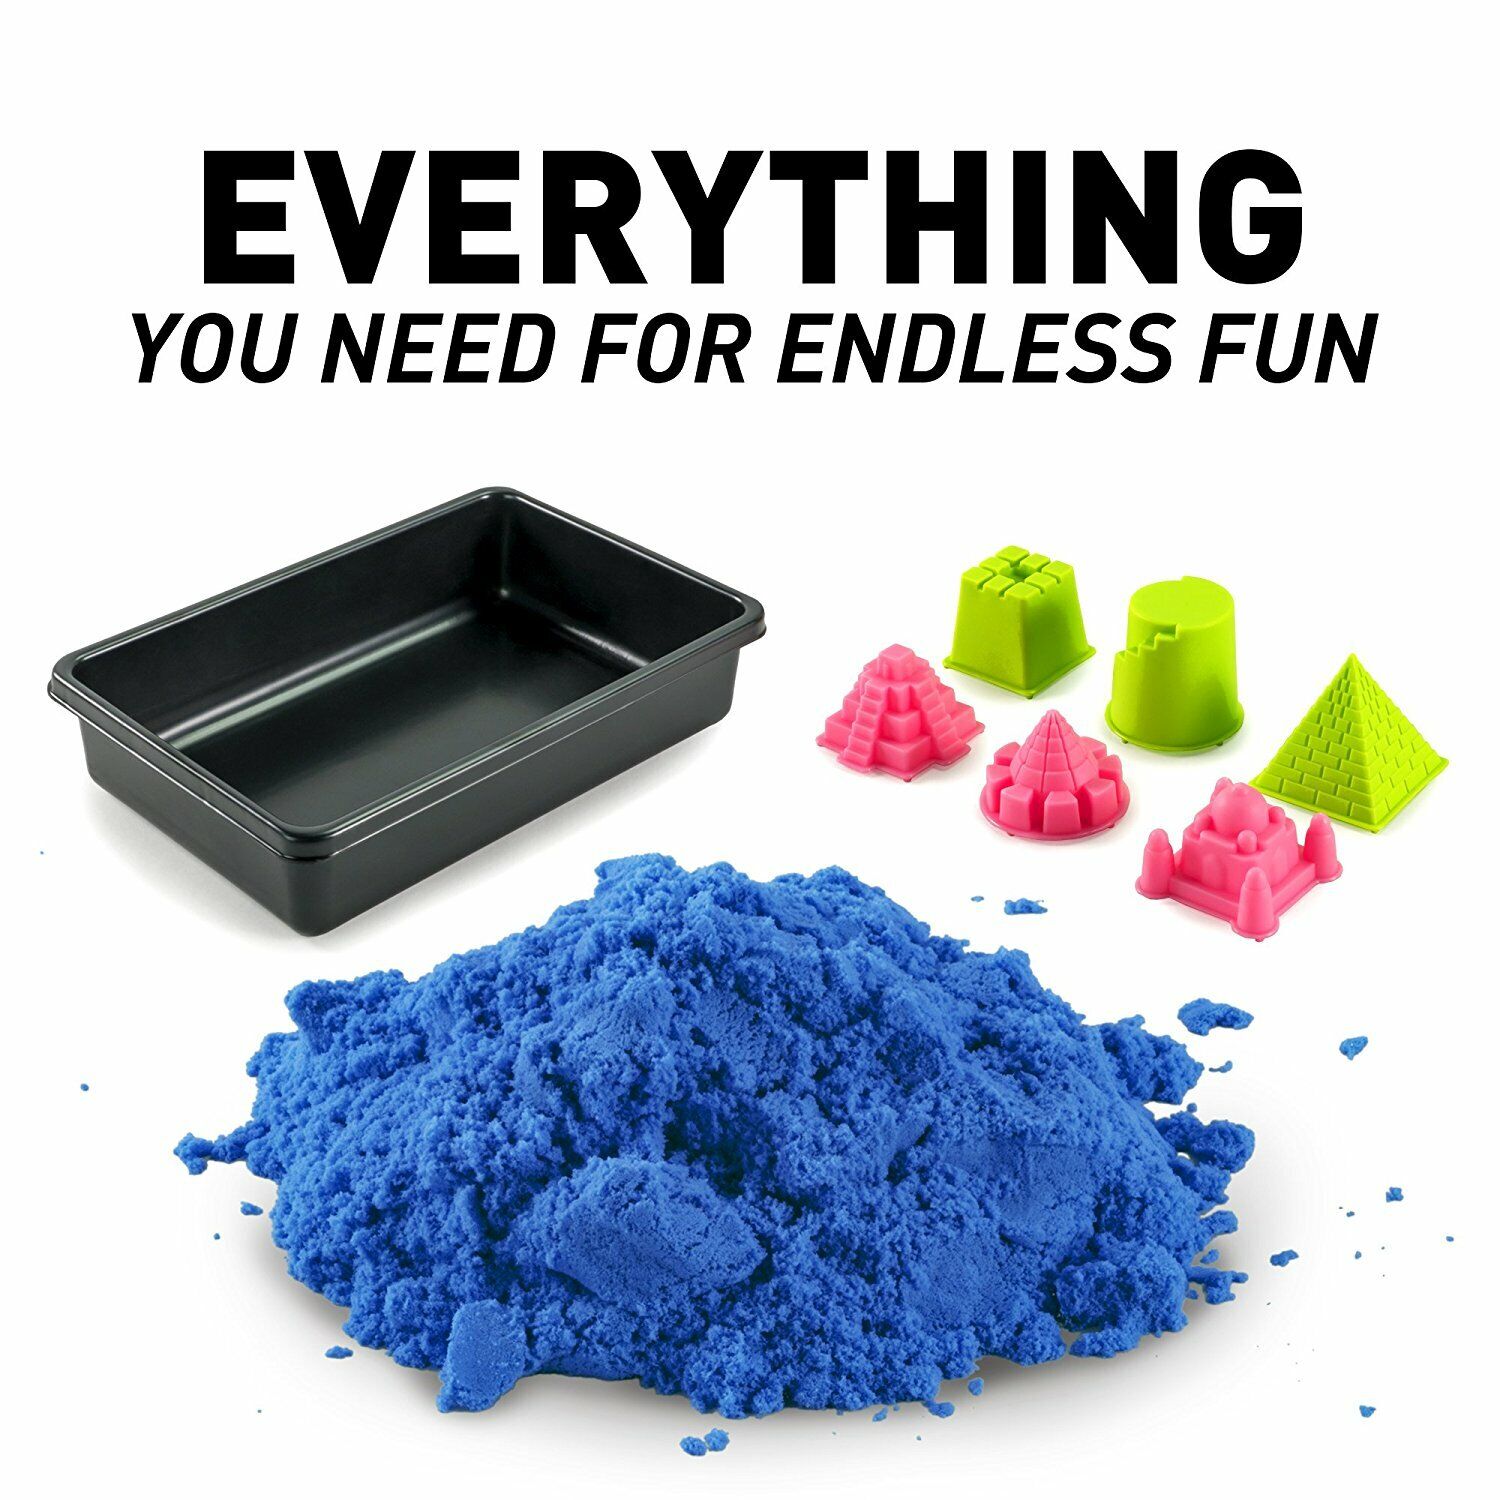 New National Geographic Blue Ultimate Play Sand - Fun for Kids!